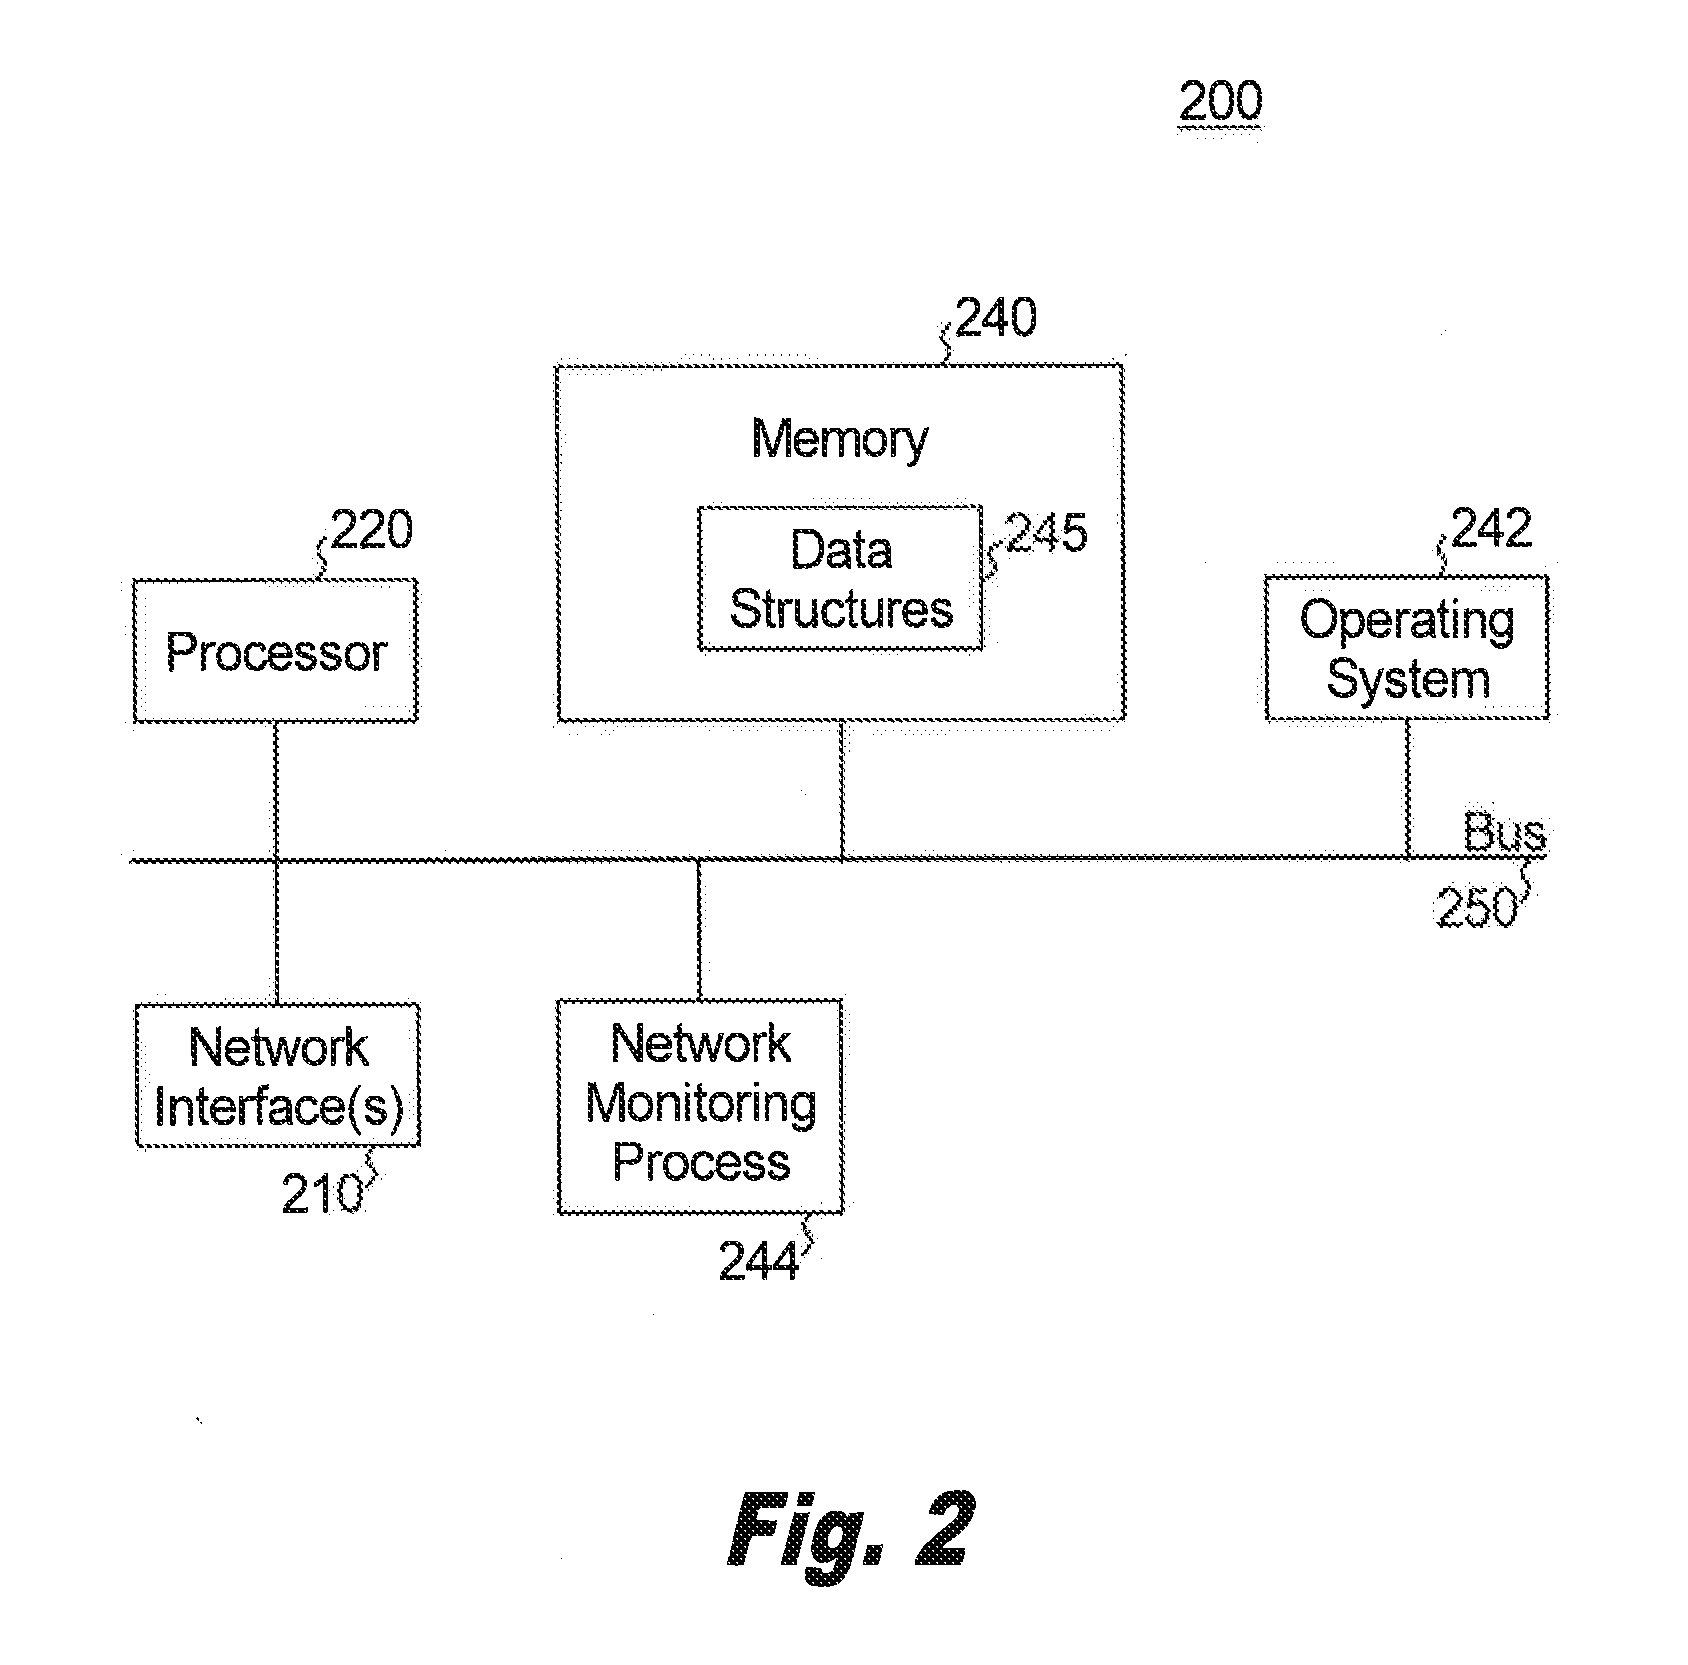 Methods and apparatus to determine network delay with location independence from retransmission delay and application response time